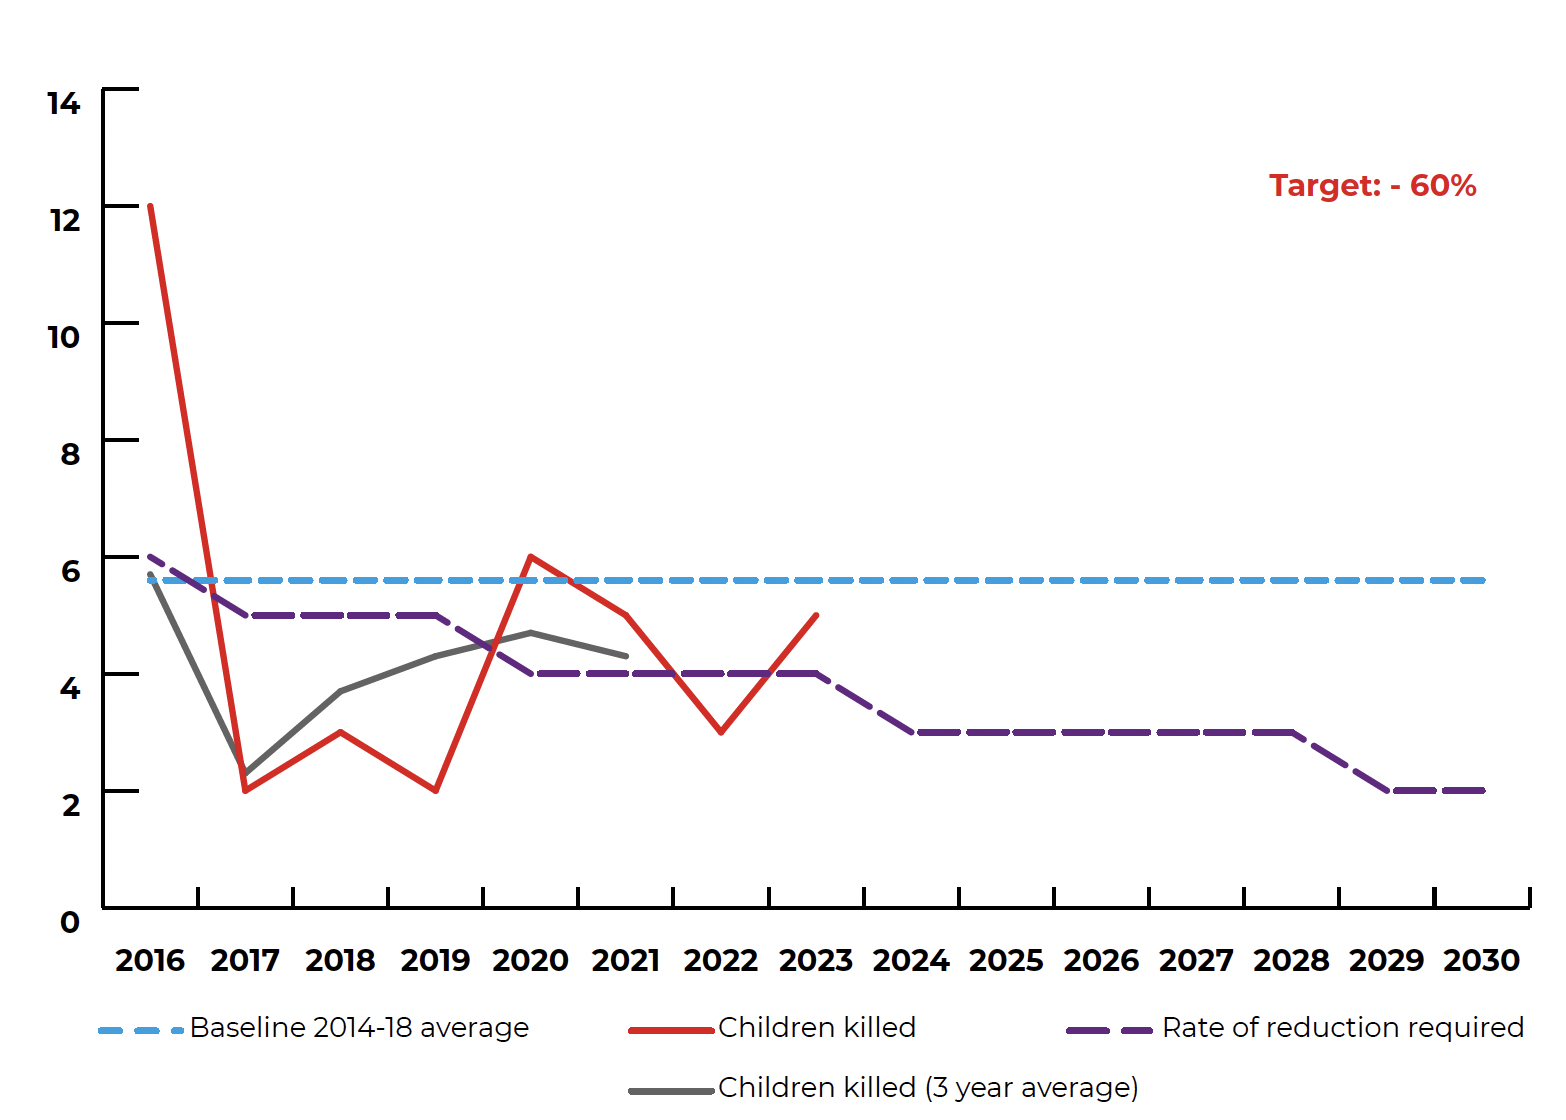 Figure shows that the total number of child fatalities in 2023 was above the indicative line required to achieve the target.